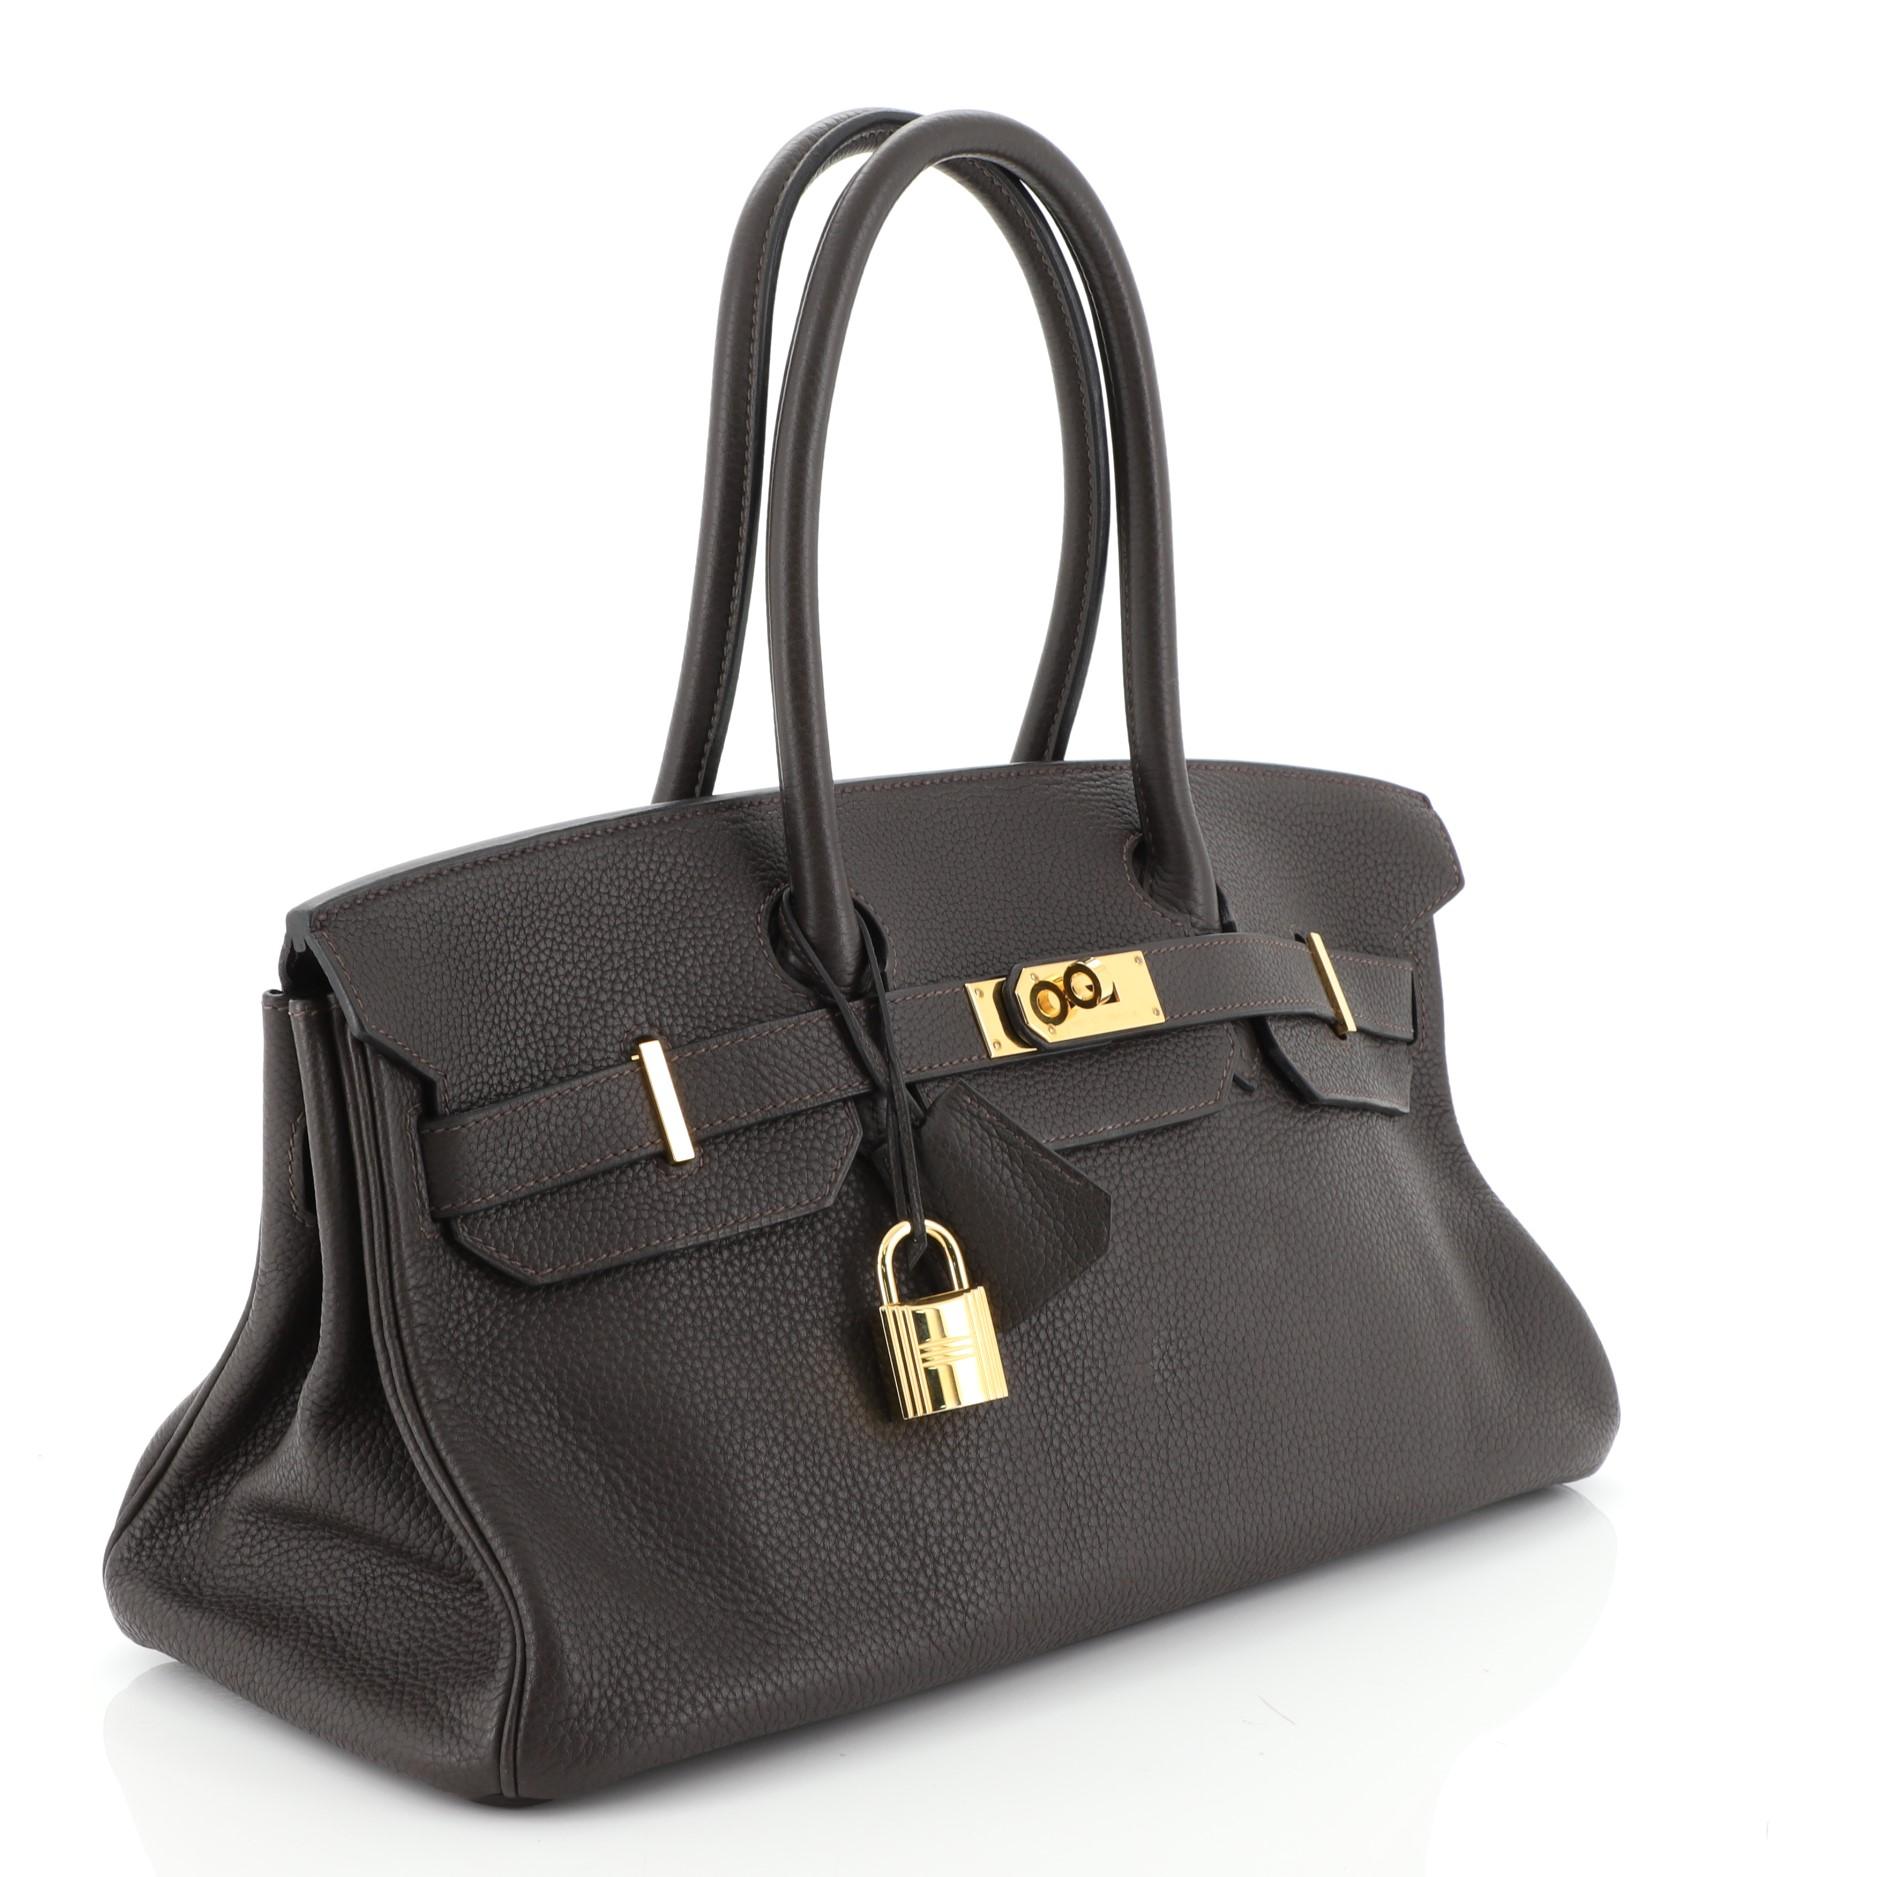 This Hermes Birkin JPG Handbag Cafe Clemence with Gold Hardware 42, crafted in Cafe Brown Clemence leather, features dual rolled top handles, frontal flap, and gold hardware. Its turn-lock closure opens to a Cafe brown Chevre leather interior with